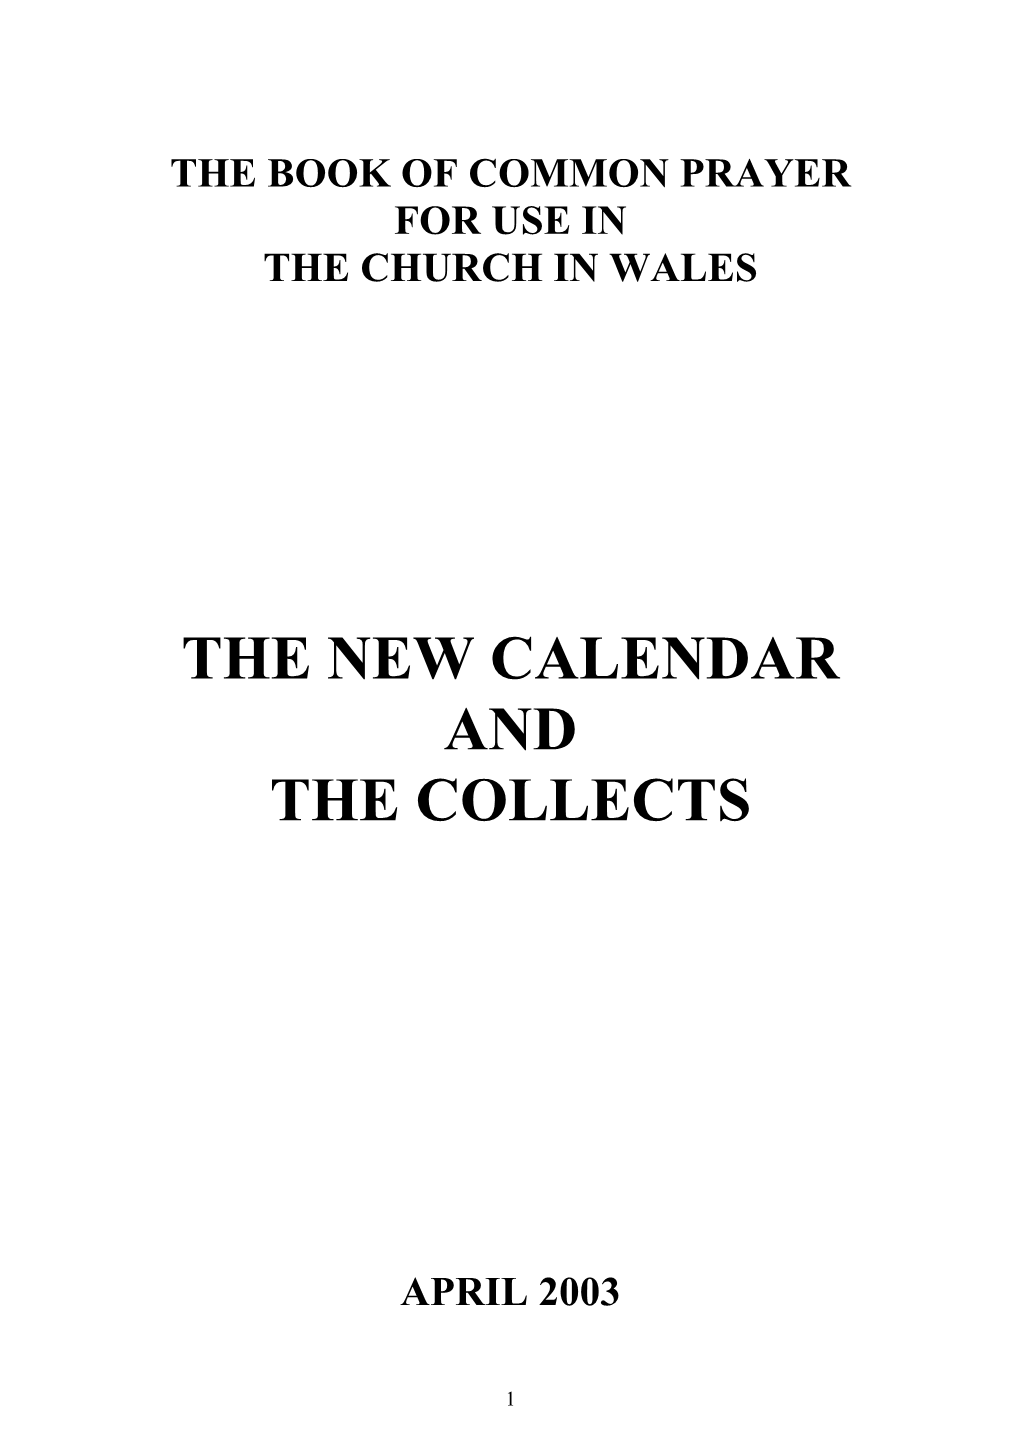 The New Calendar and the Collects